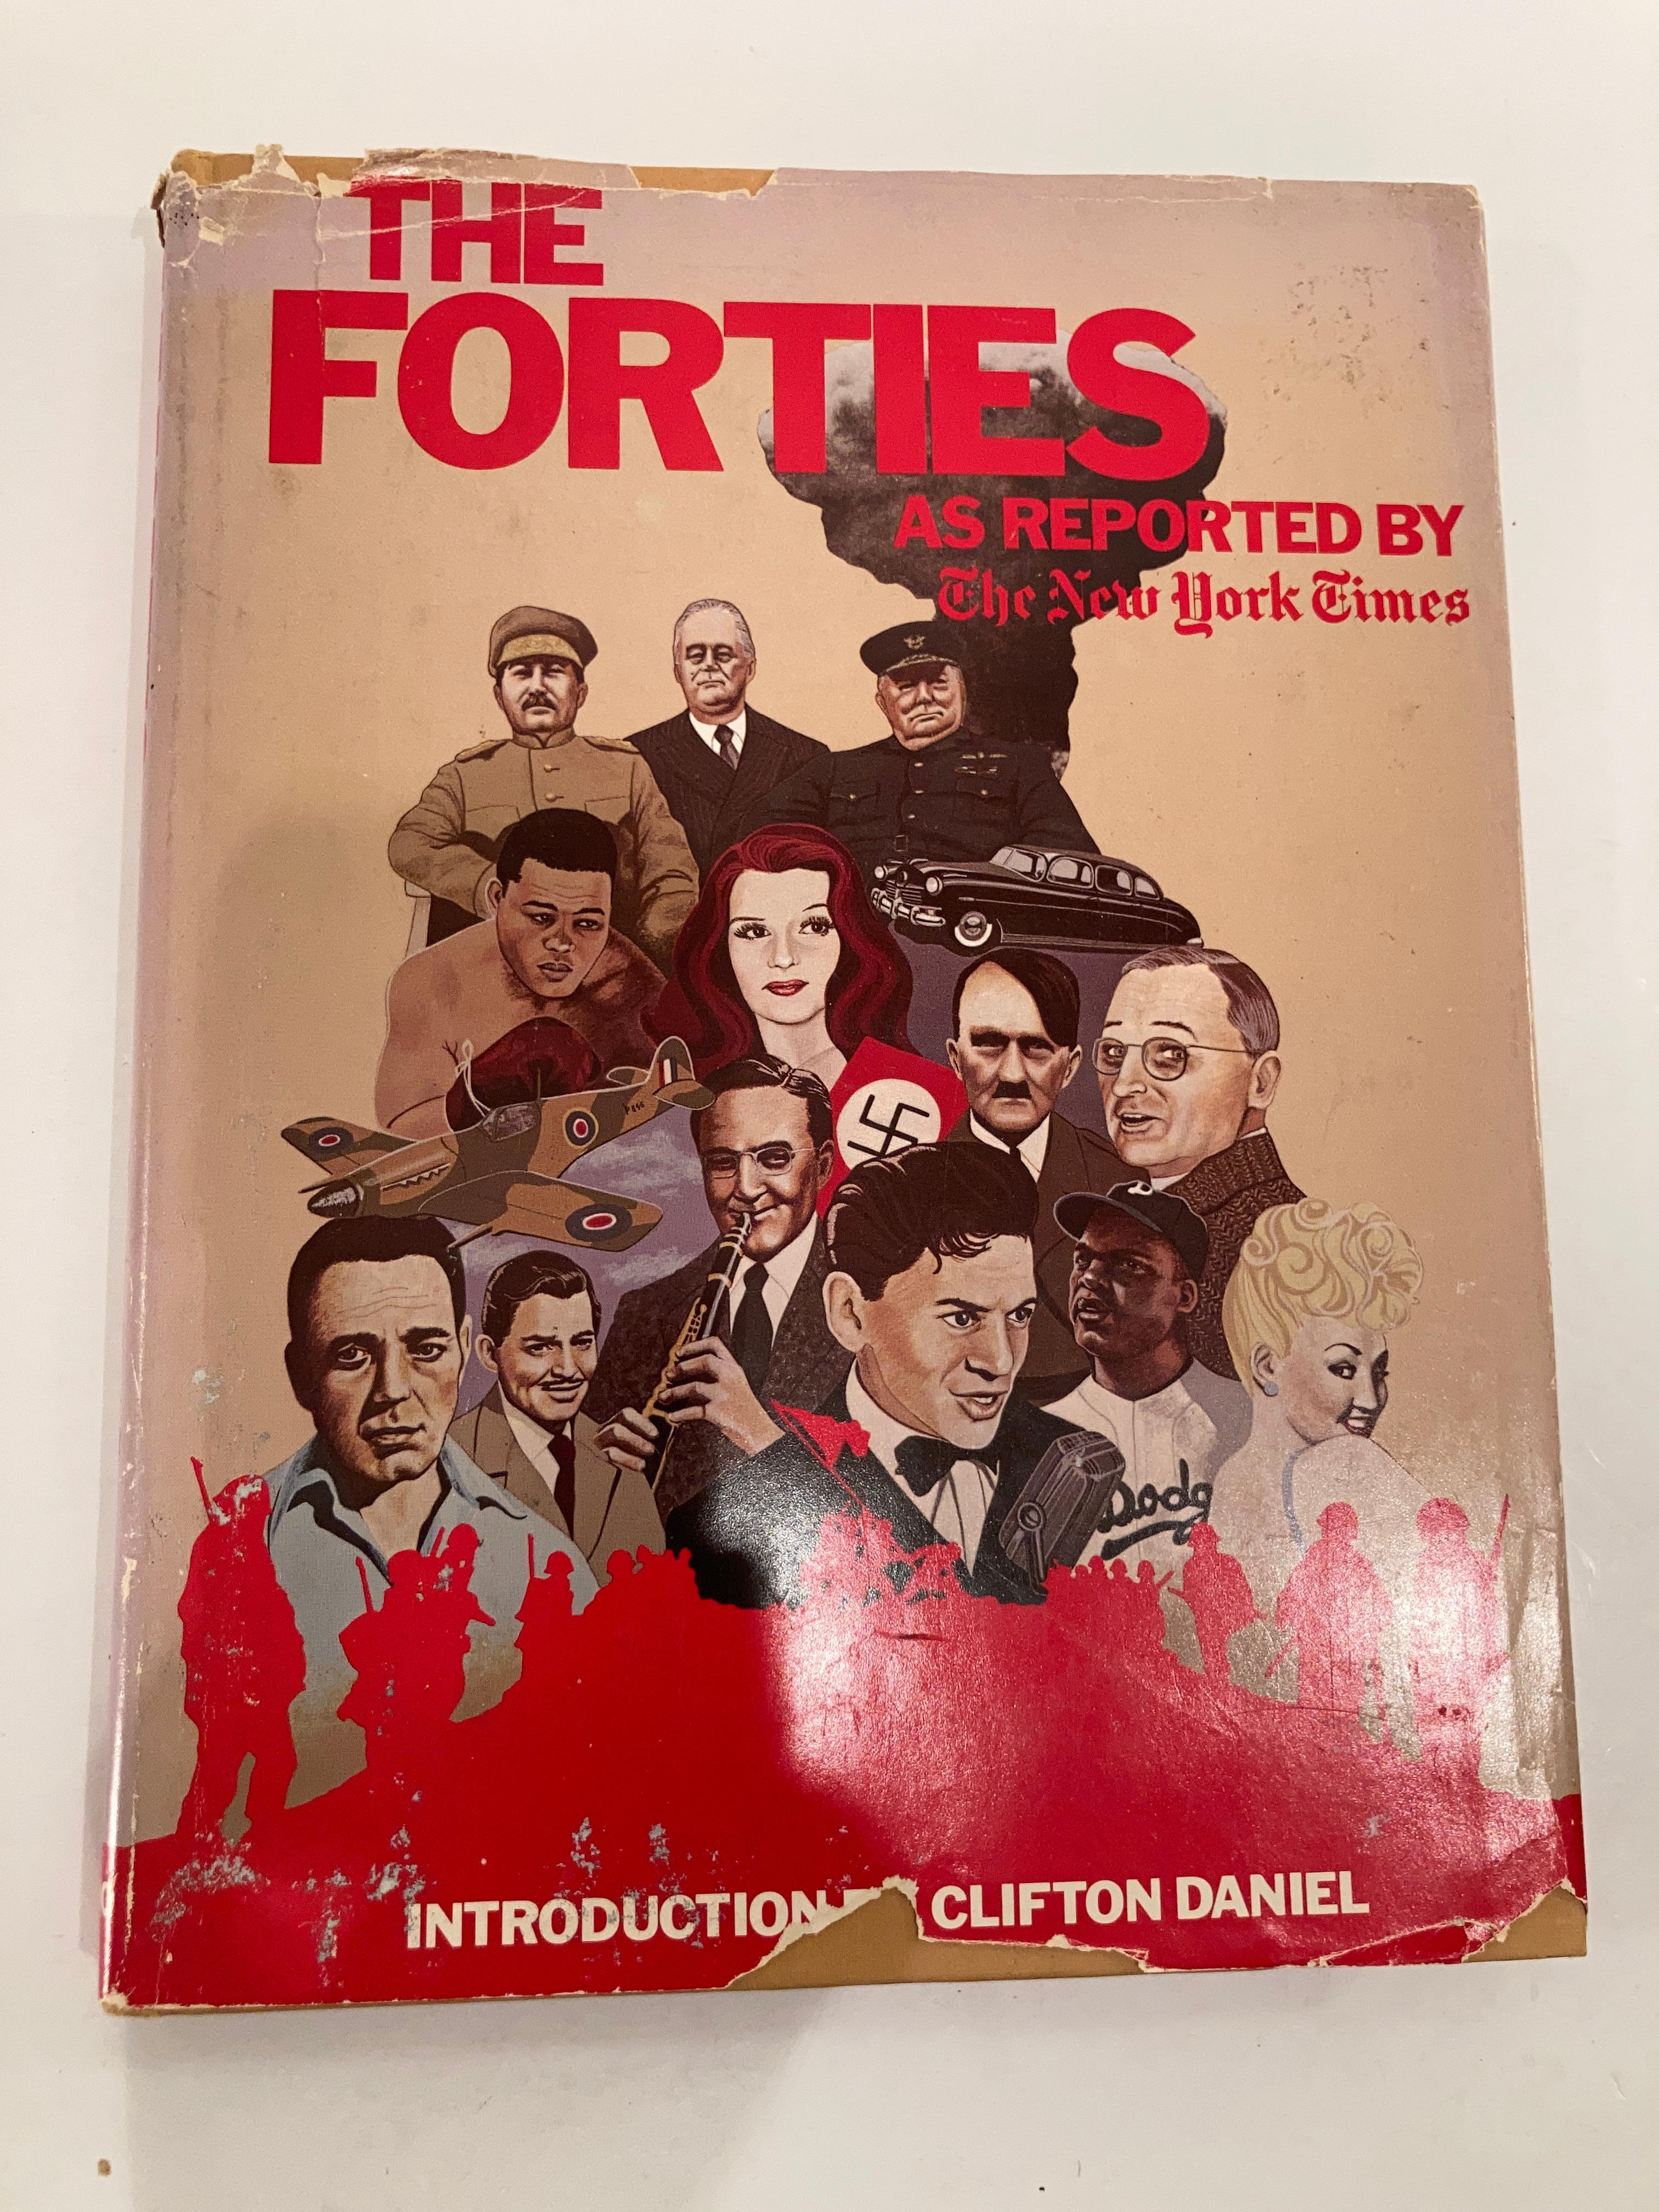 The Forties: As Reported By The New York Times
By Keylin, Arleen; Cohen, Jonathan.
Title
The Forties: As Reported by the New York Times
Author Keylin, Arleen; Cohen, Jonathan
Format/Binding Hardcover
This is a beautiful coffee table collectible